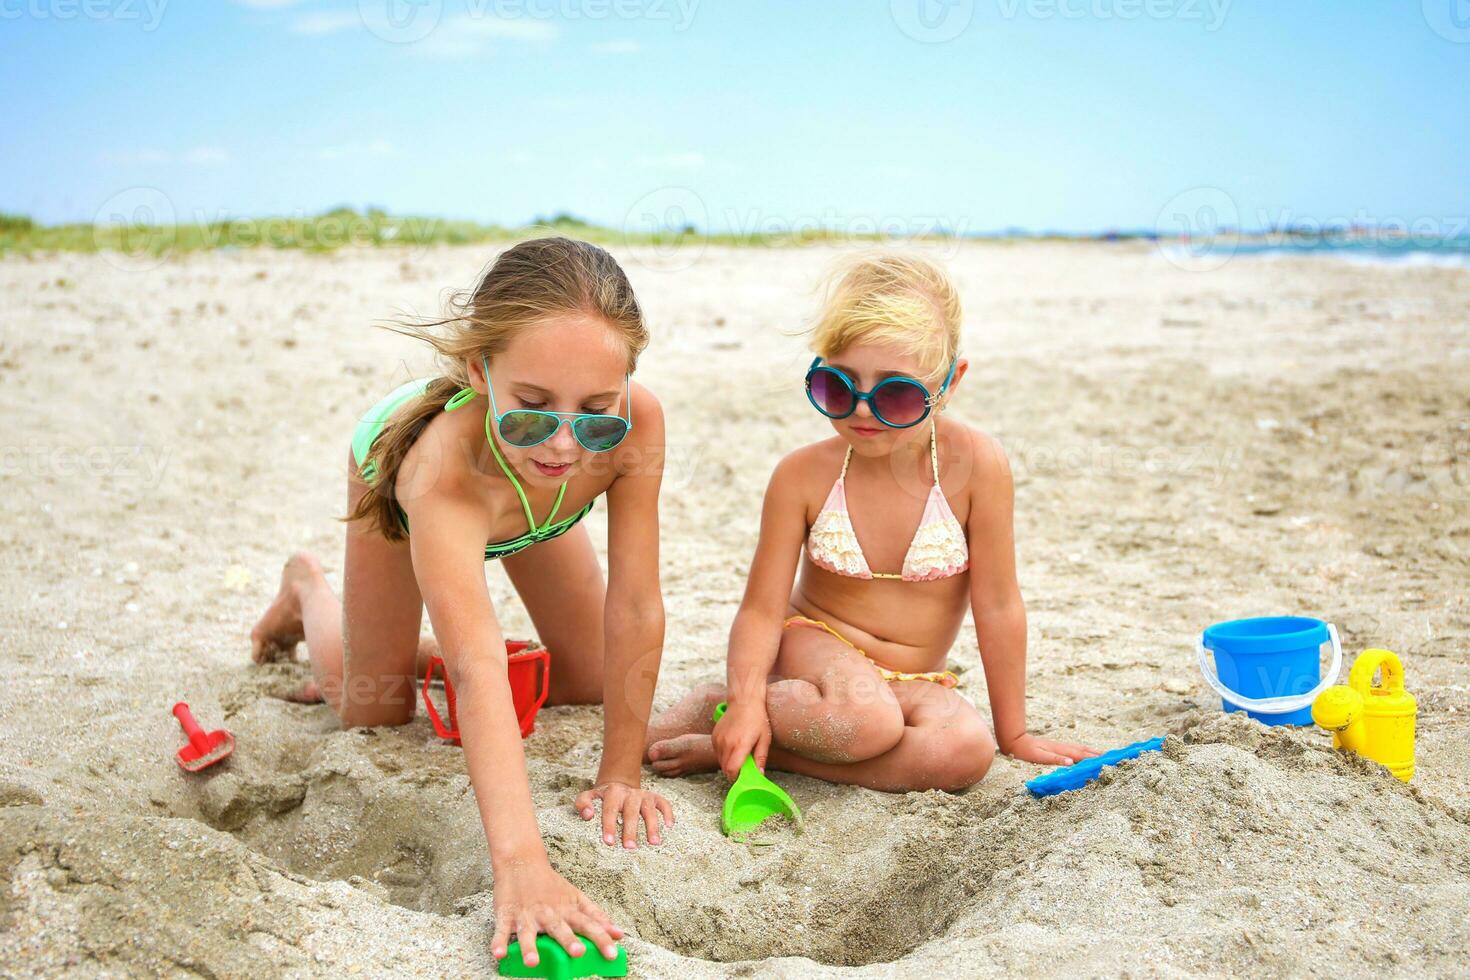 Children play with sand on beach. photo